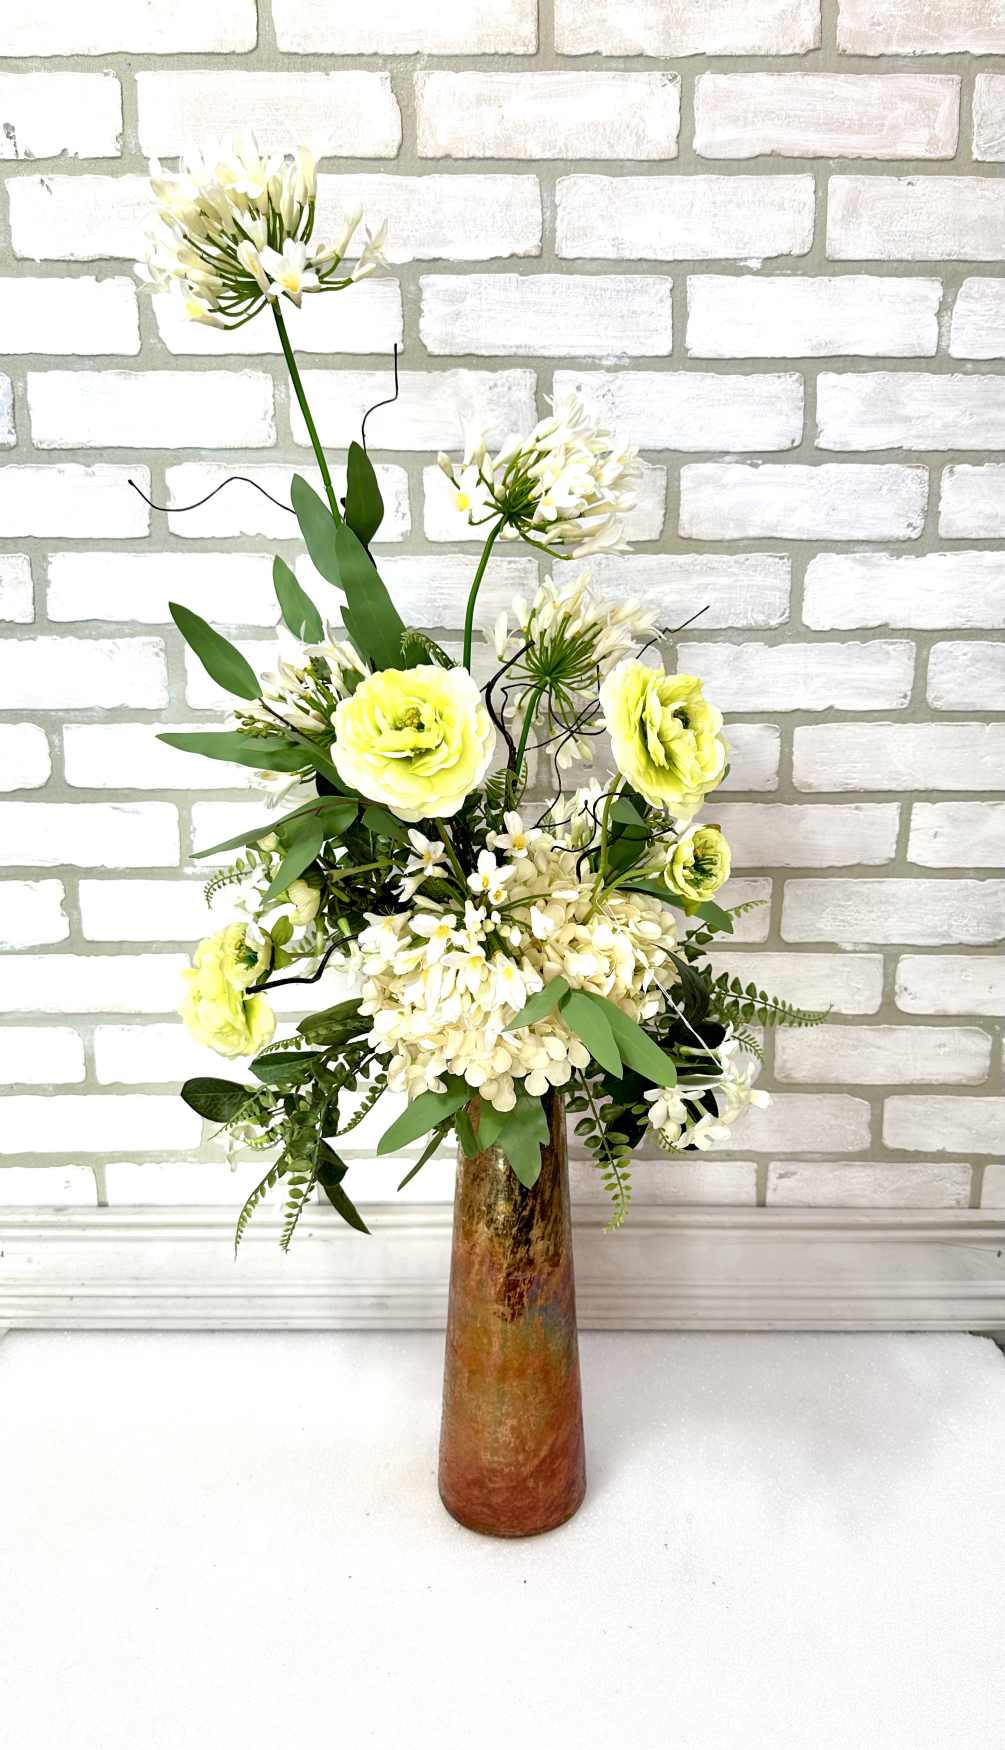 A rustic toned vase arranged with artificial white, hydrangea, two toned ranunculus